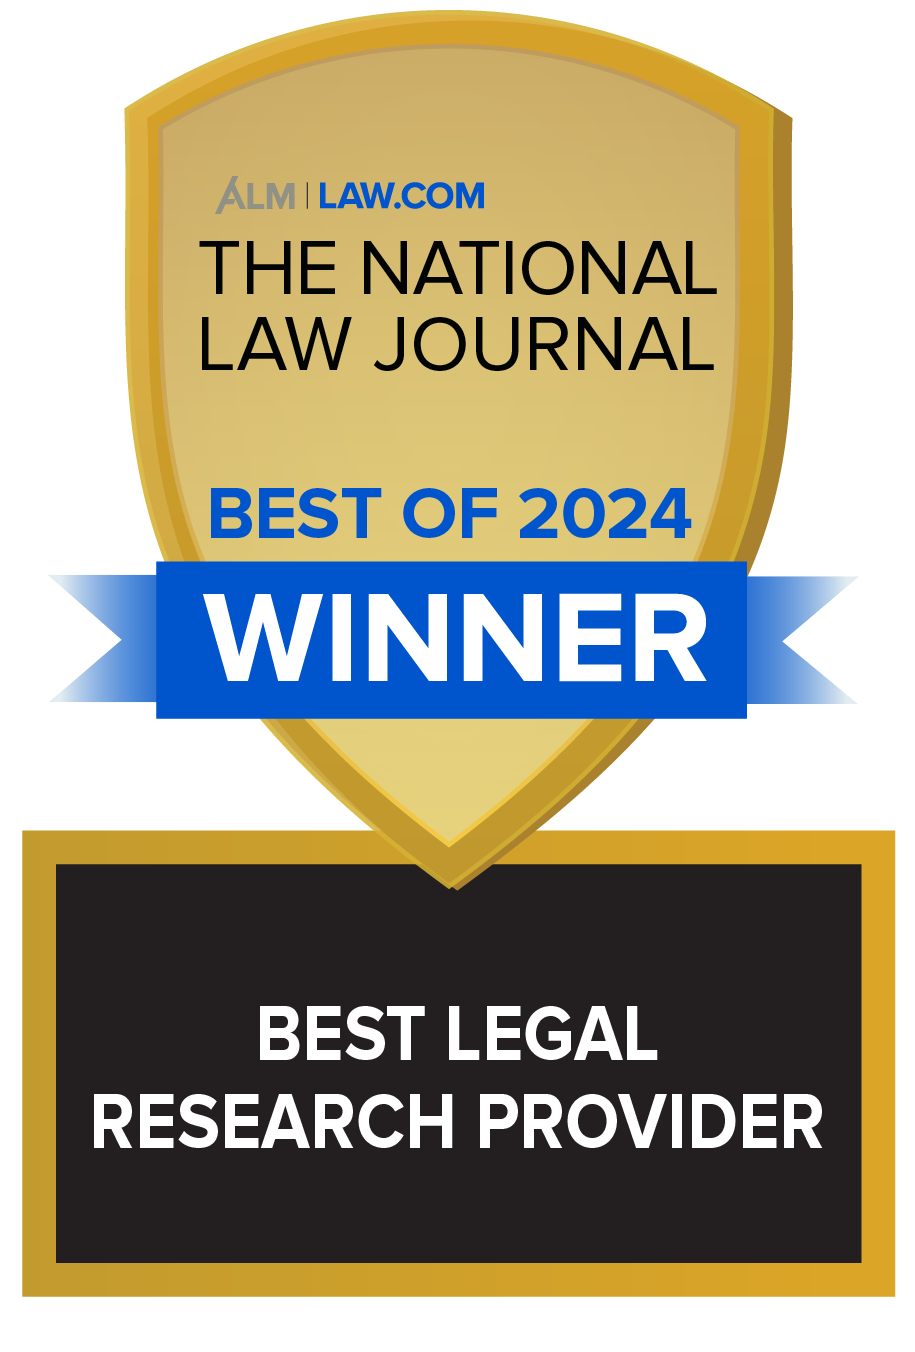 The National Law Journal best of 2024 award logo